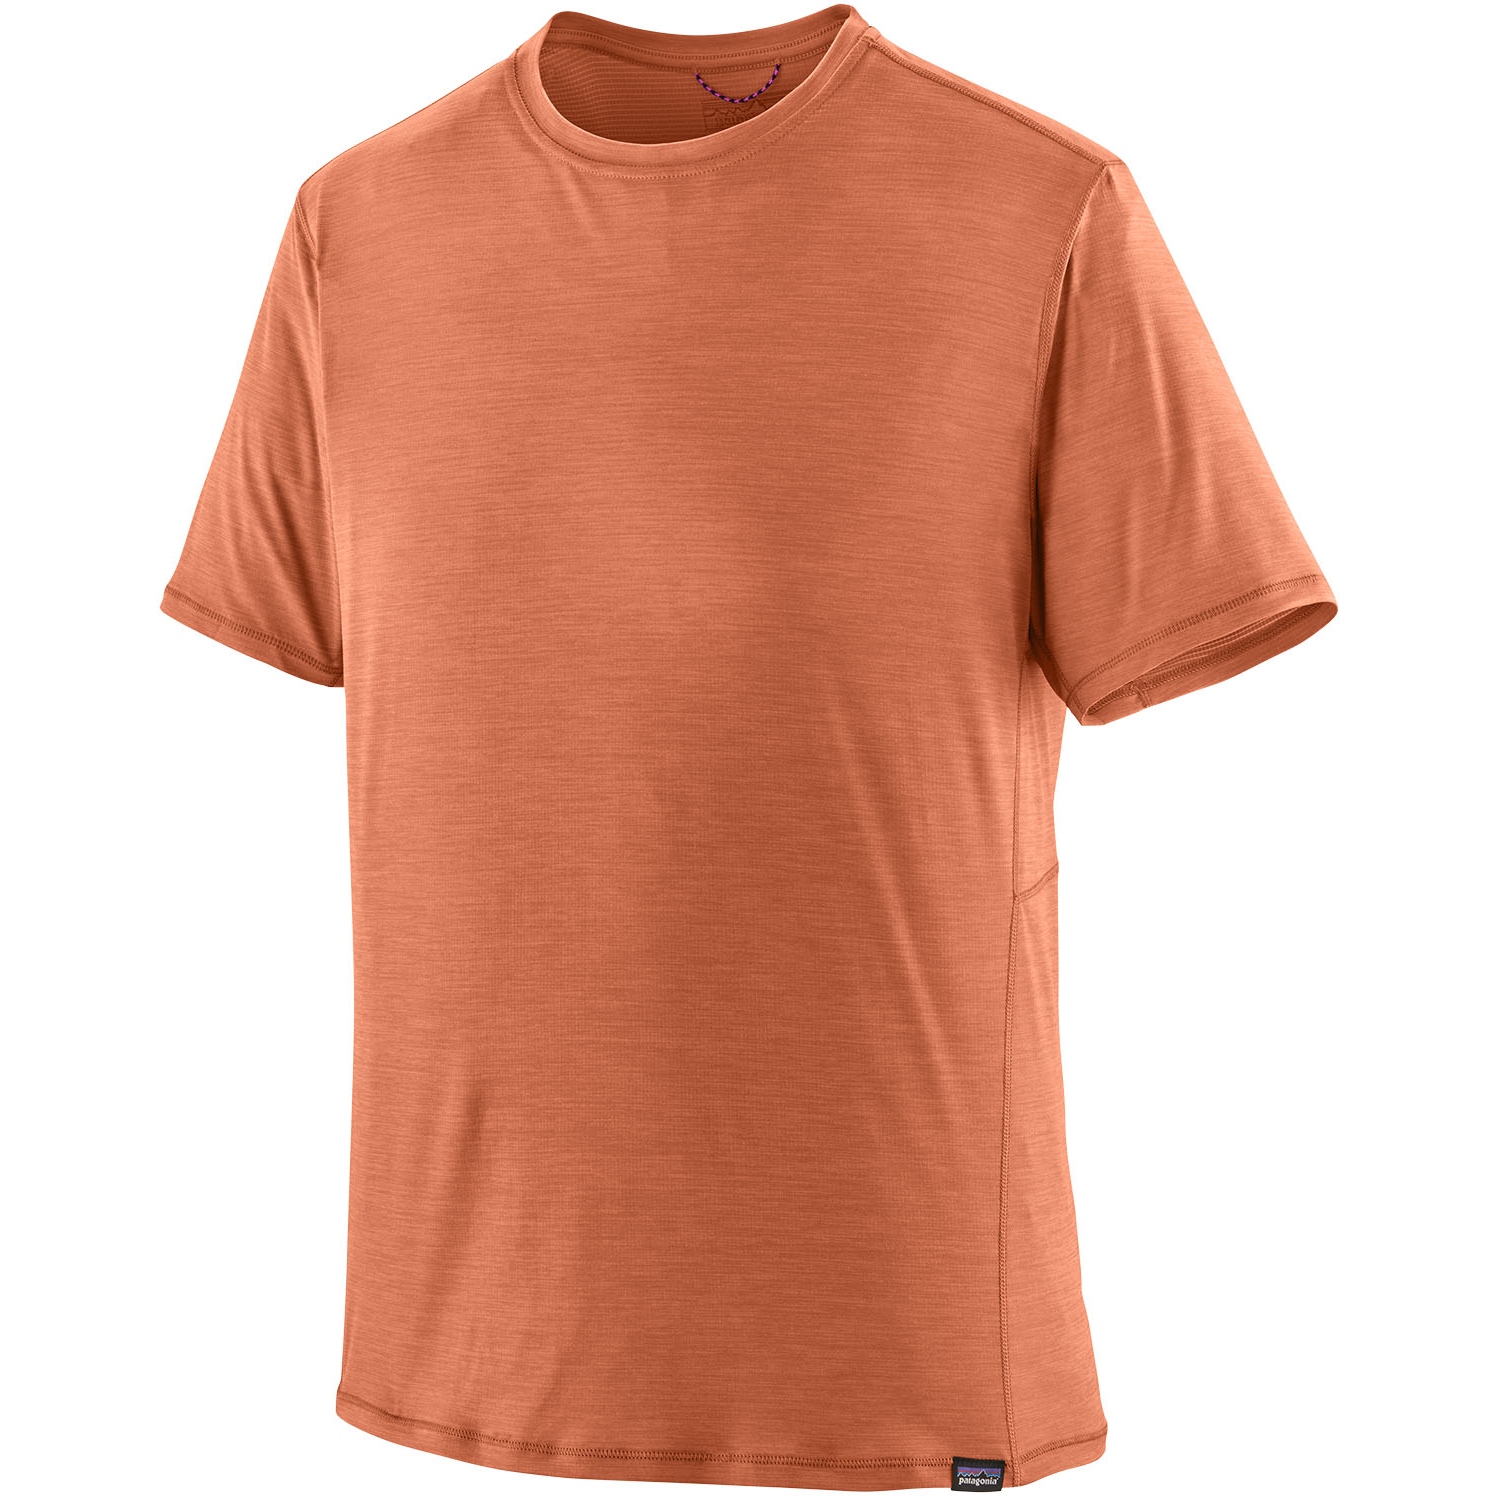 Picture of Patagonia Capilene Cool Lightweight T-Shirt Men - Sienna Clay - Light Sienna Clay X-Dye